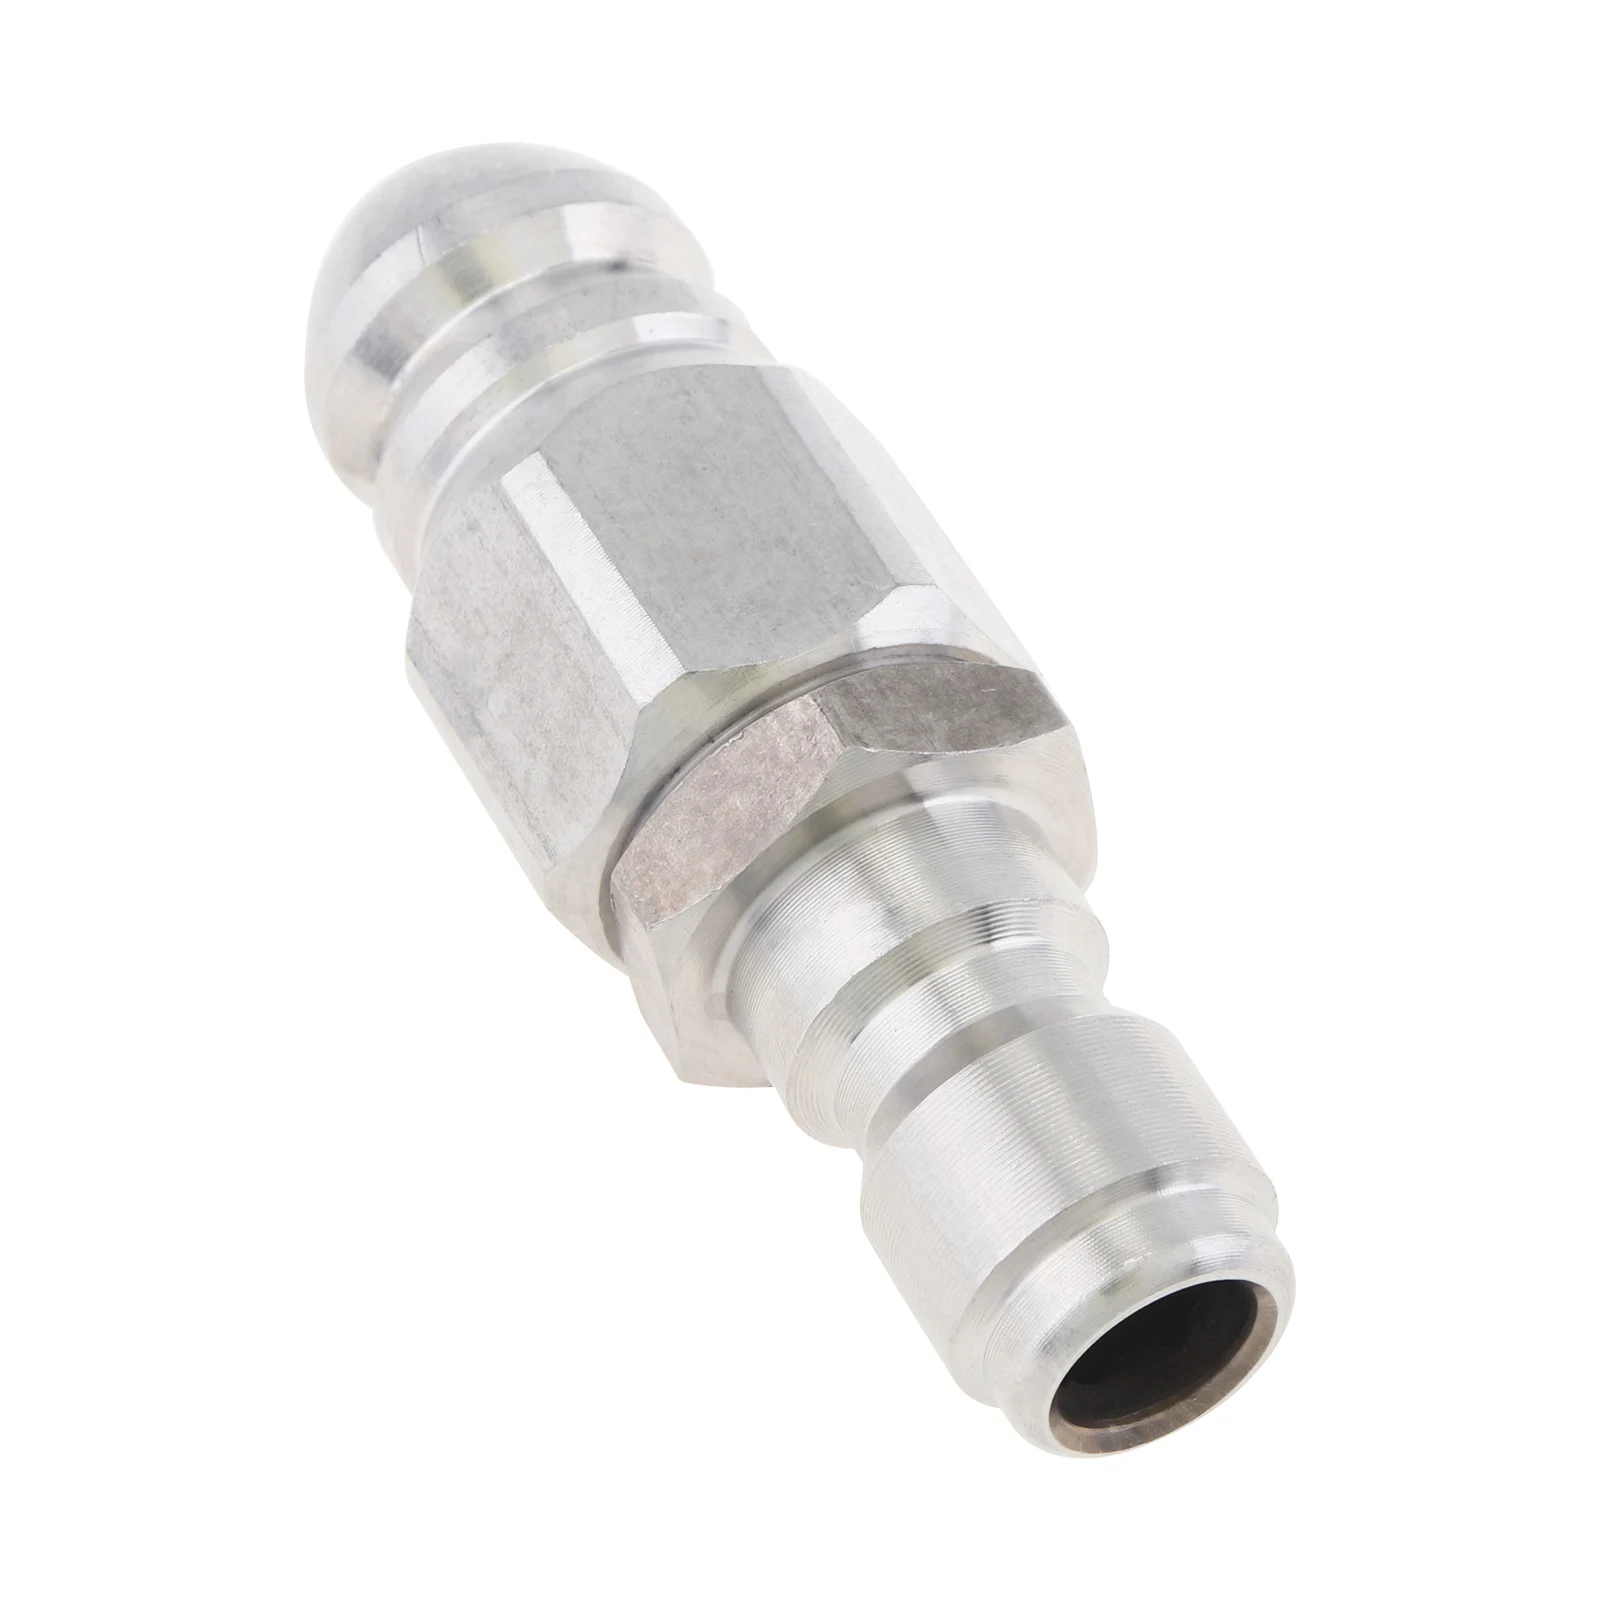 Pressure Washer Sewer Jetter Nozzle Mini Compact Quickly Connector for Drain Jetting Hose, Pressure Drain Jetter Hose Nozzle mini telescopic linear actuator mini high thrust 60mm 75mm suction cup 3xlr connector small reciprocating mechanism motor dc 24v